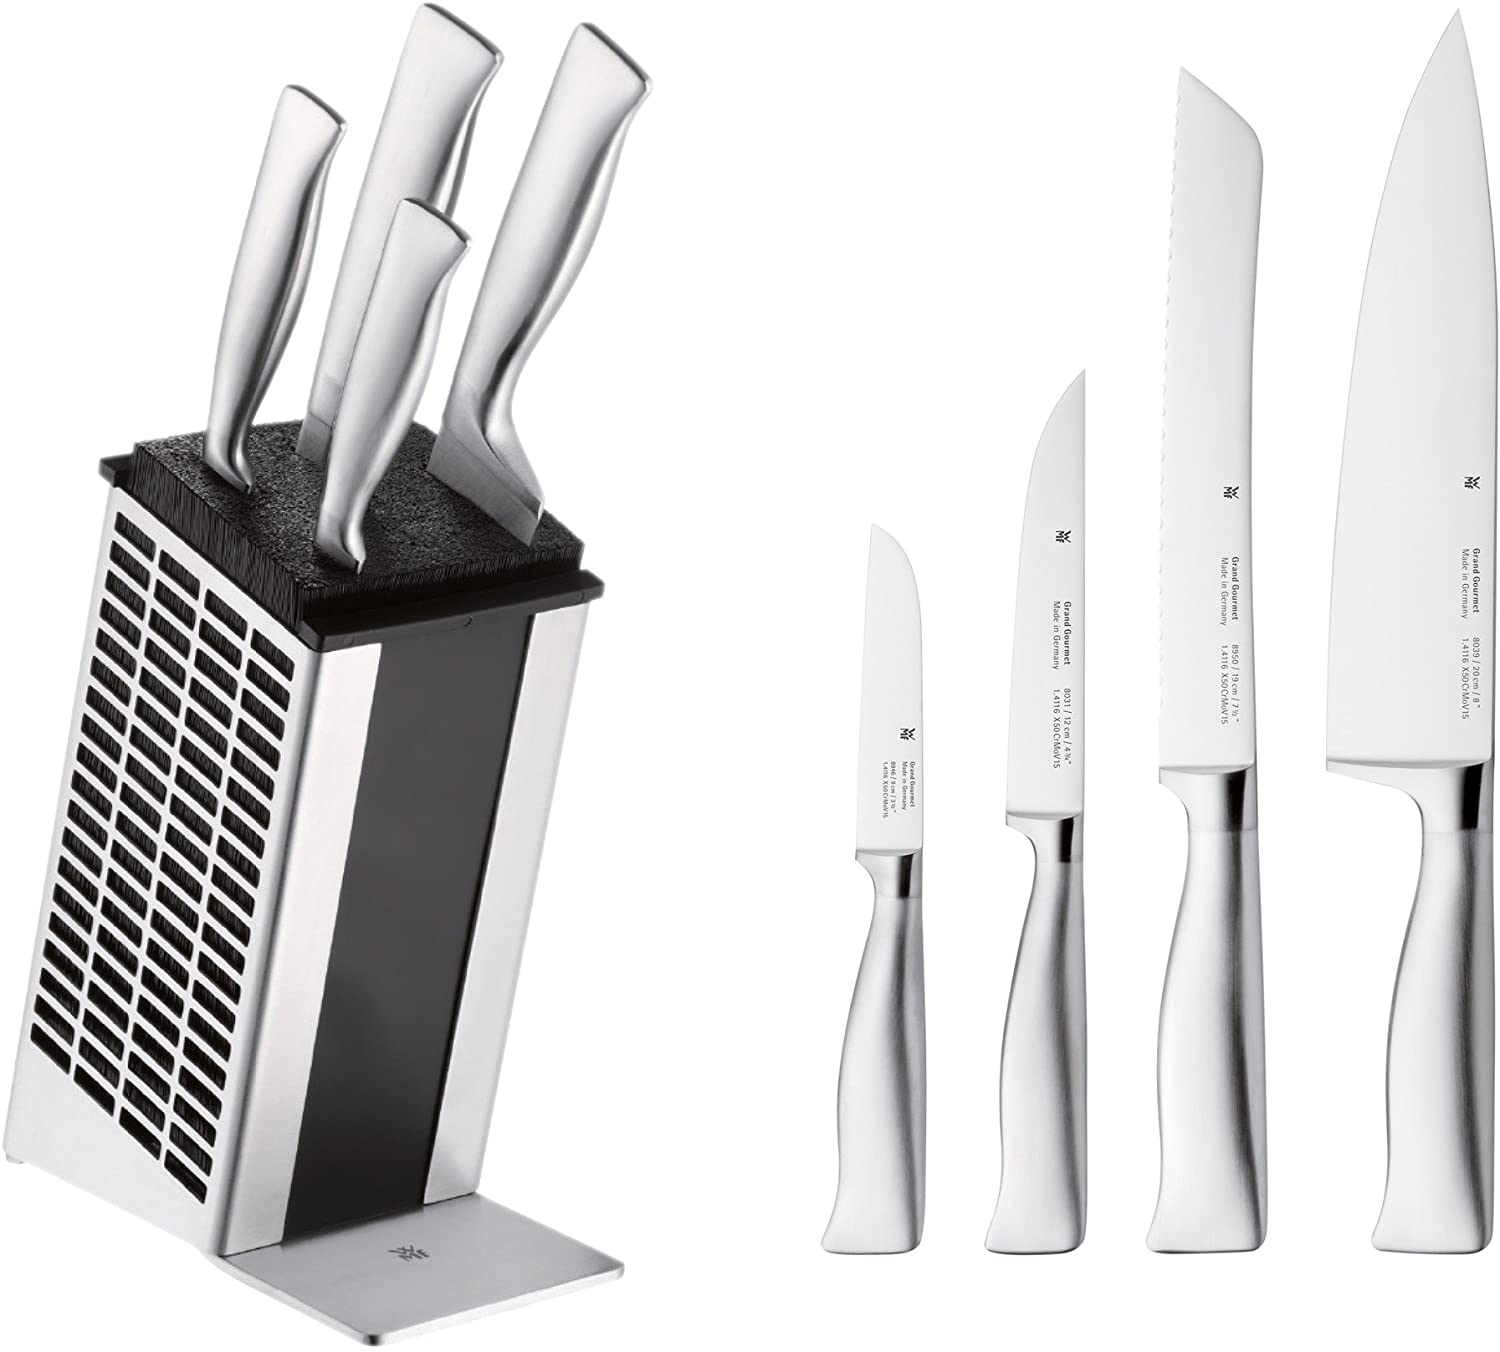 WMF Grand Gourmet 5-Piece Knife Block with Knife Set, Made in Germany, 4 Forged Knives, Stainless Steel Block, Plastic Bristle Insert, Performance Cut